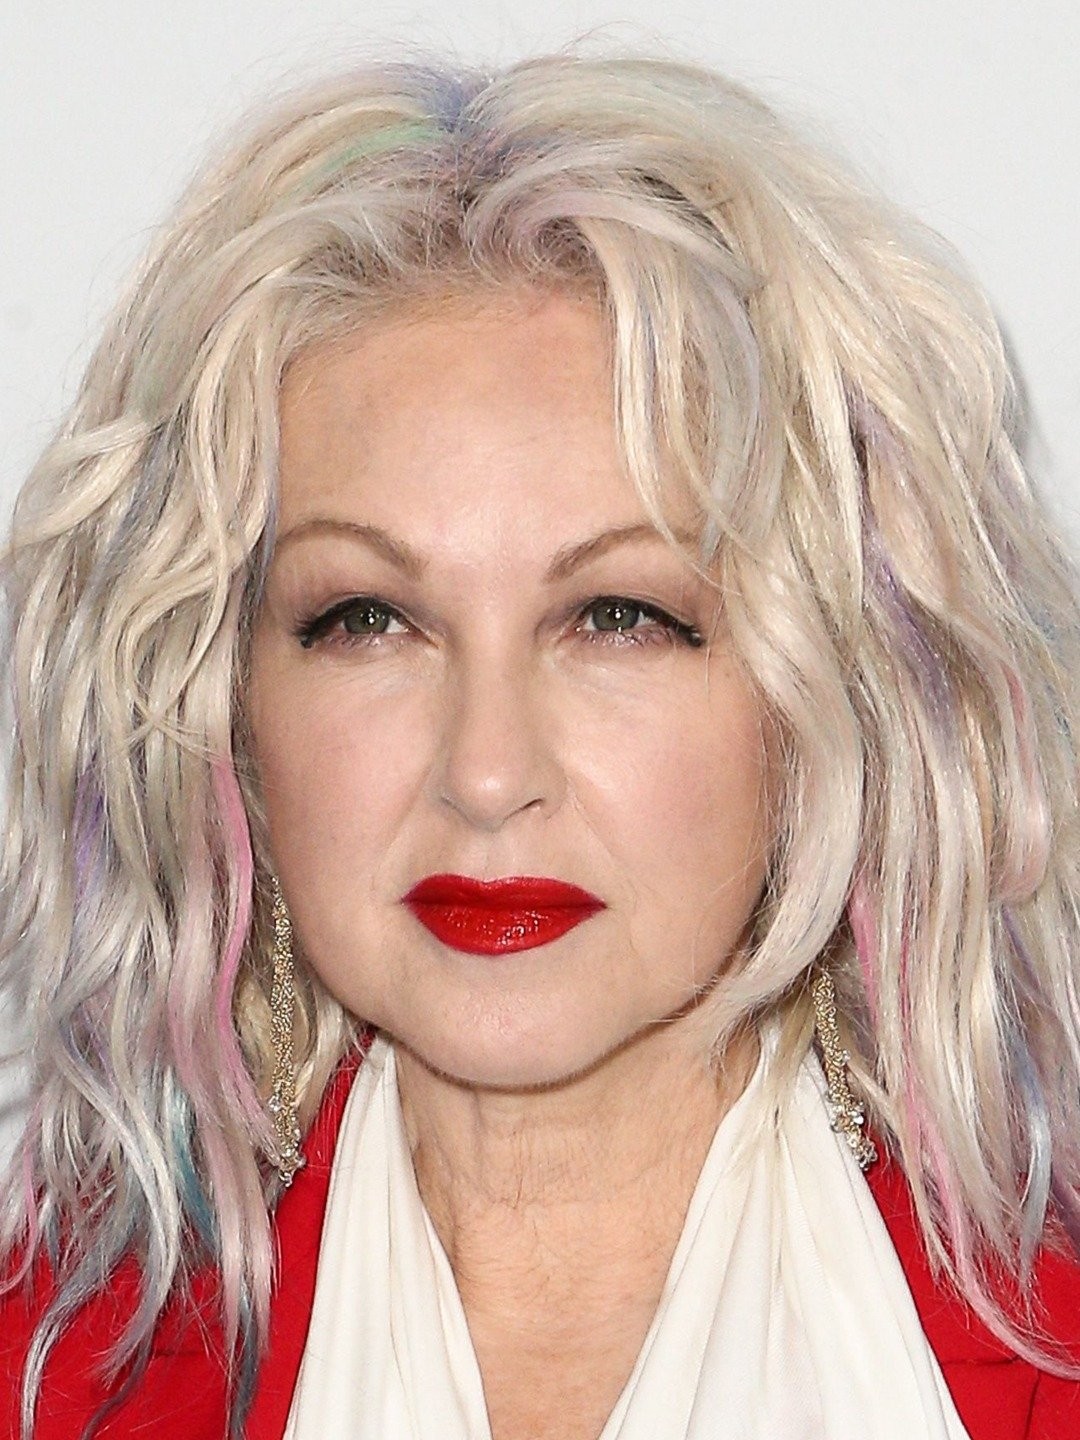 brandt warner recommends naked pictures of cyndi lauper pic